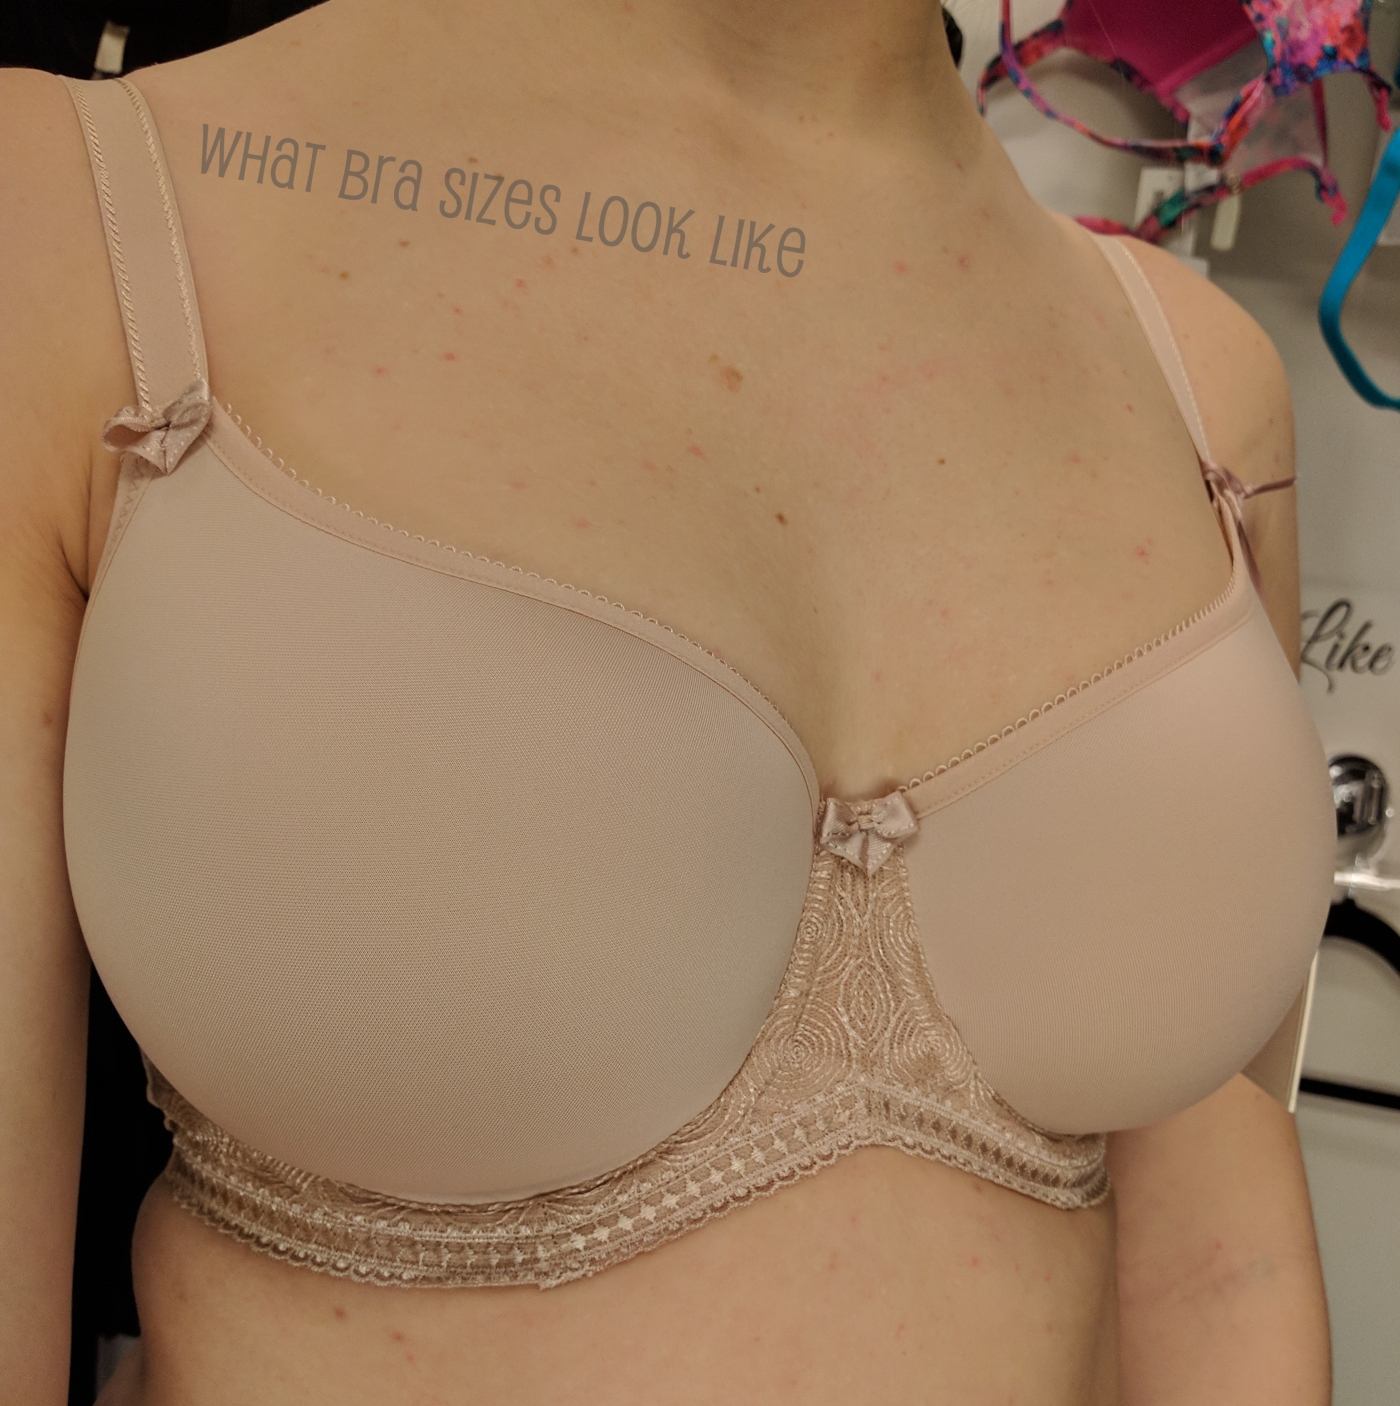 30G in Various – What Bra Sizes Look Like